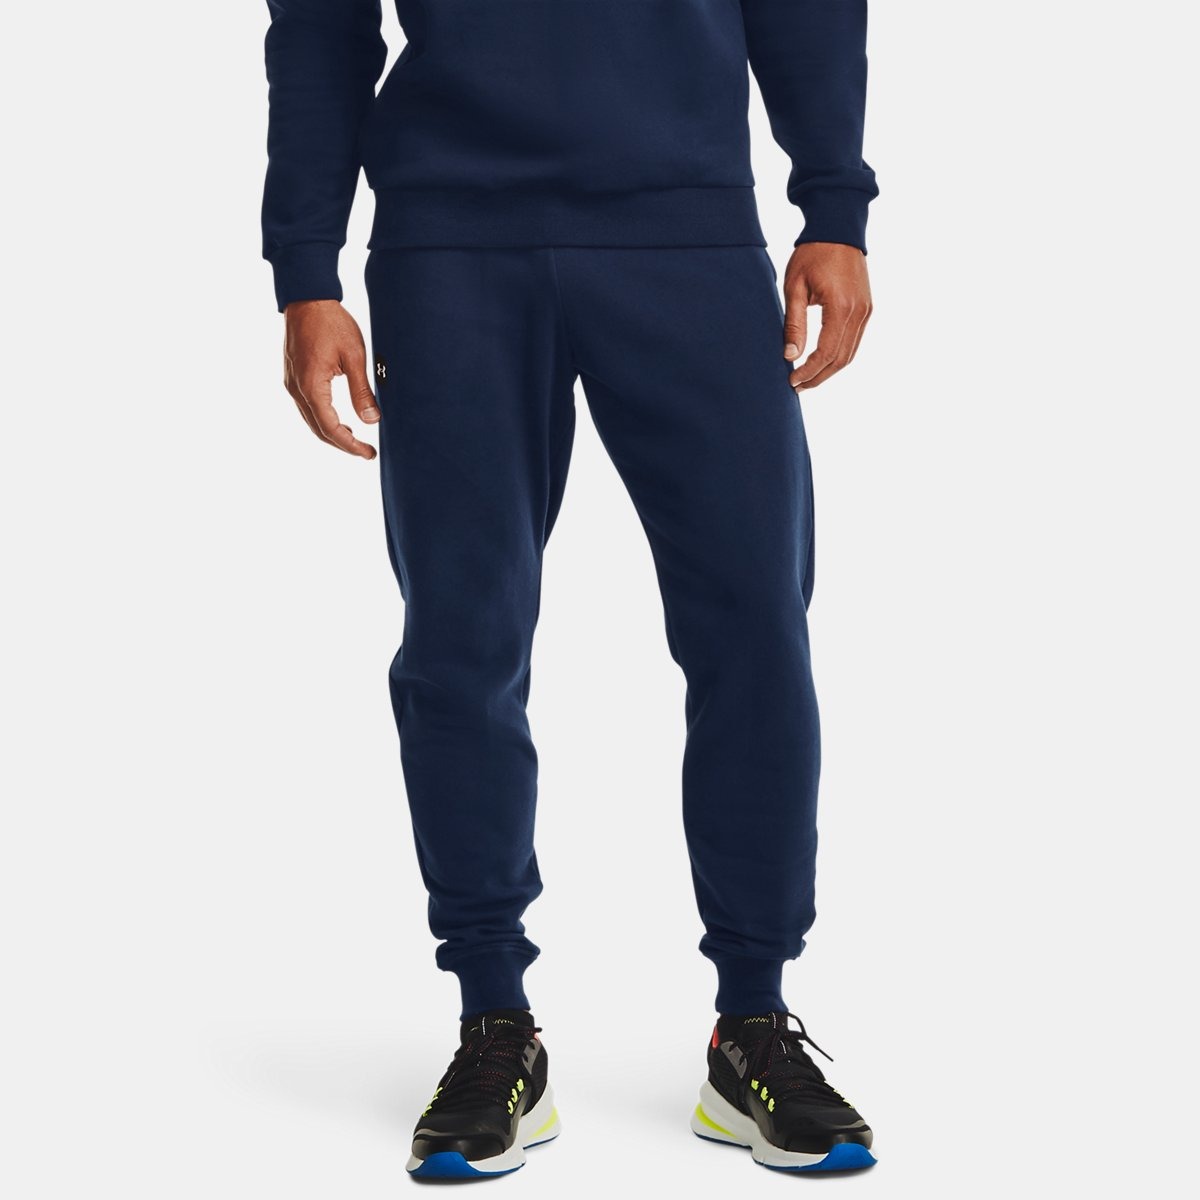 Gent Joggers Blue at Under Armour GOOFASH